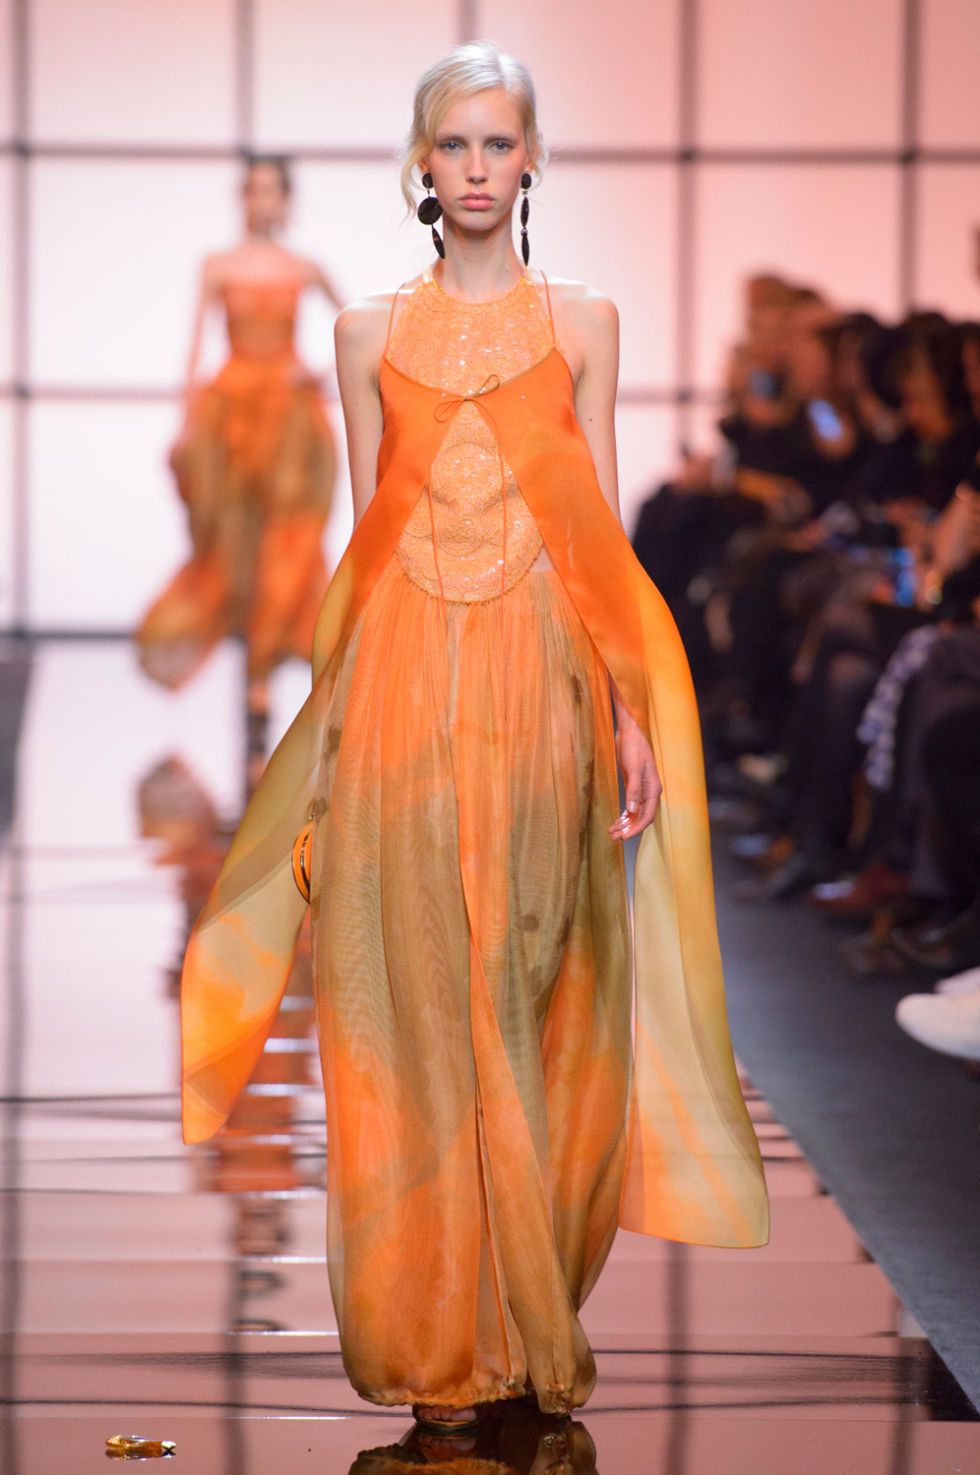 Hairstyle, Fashion show, Shoulder, Runway, Dress, Orange, Style, Amber, Fashion model, Gown, 